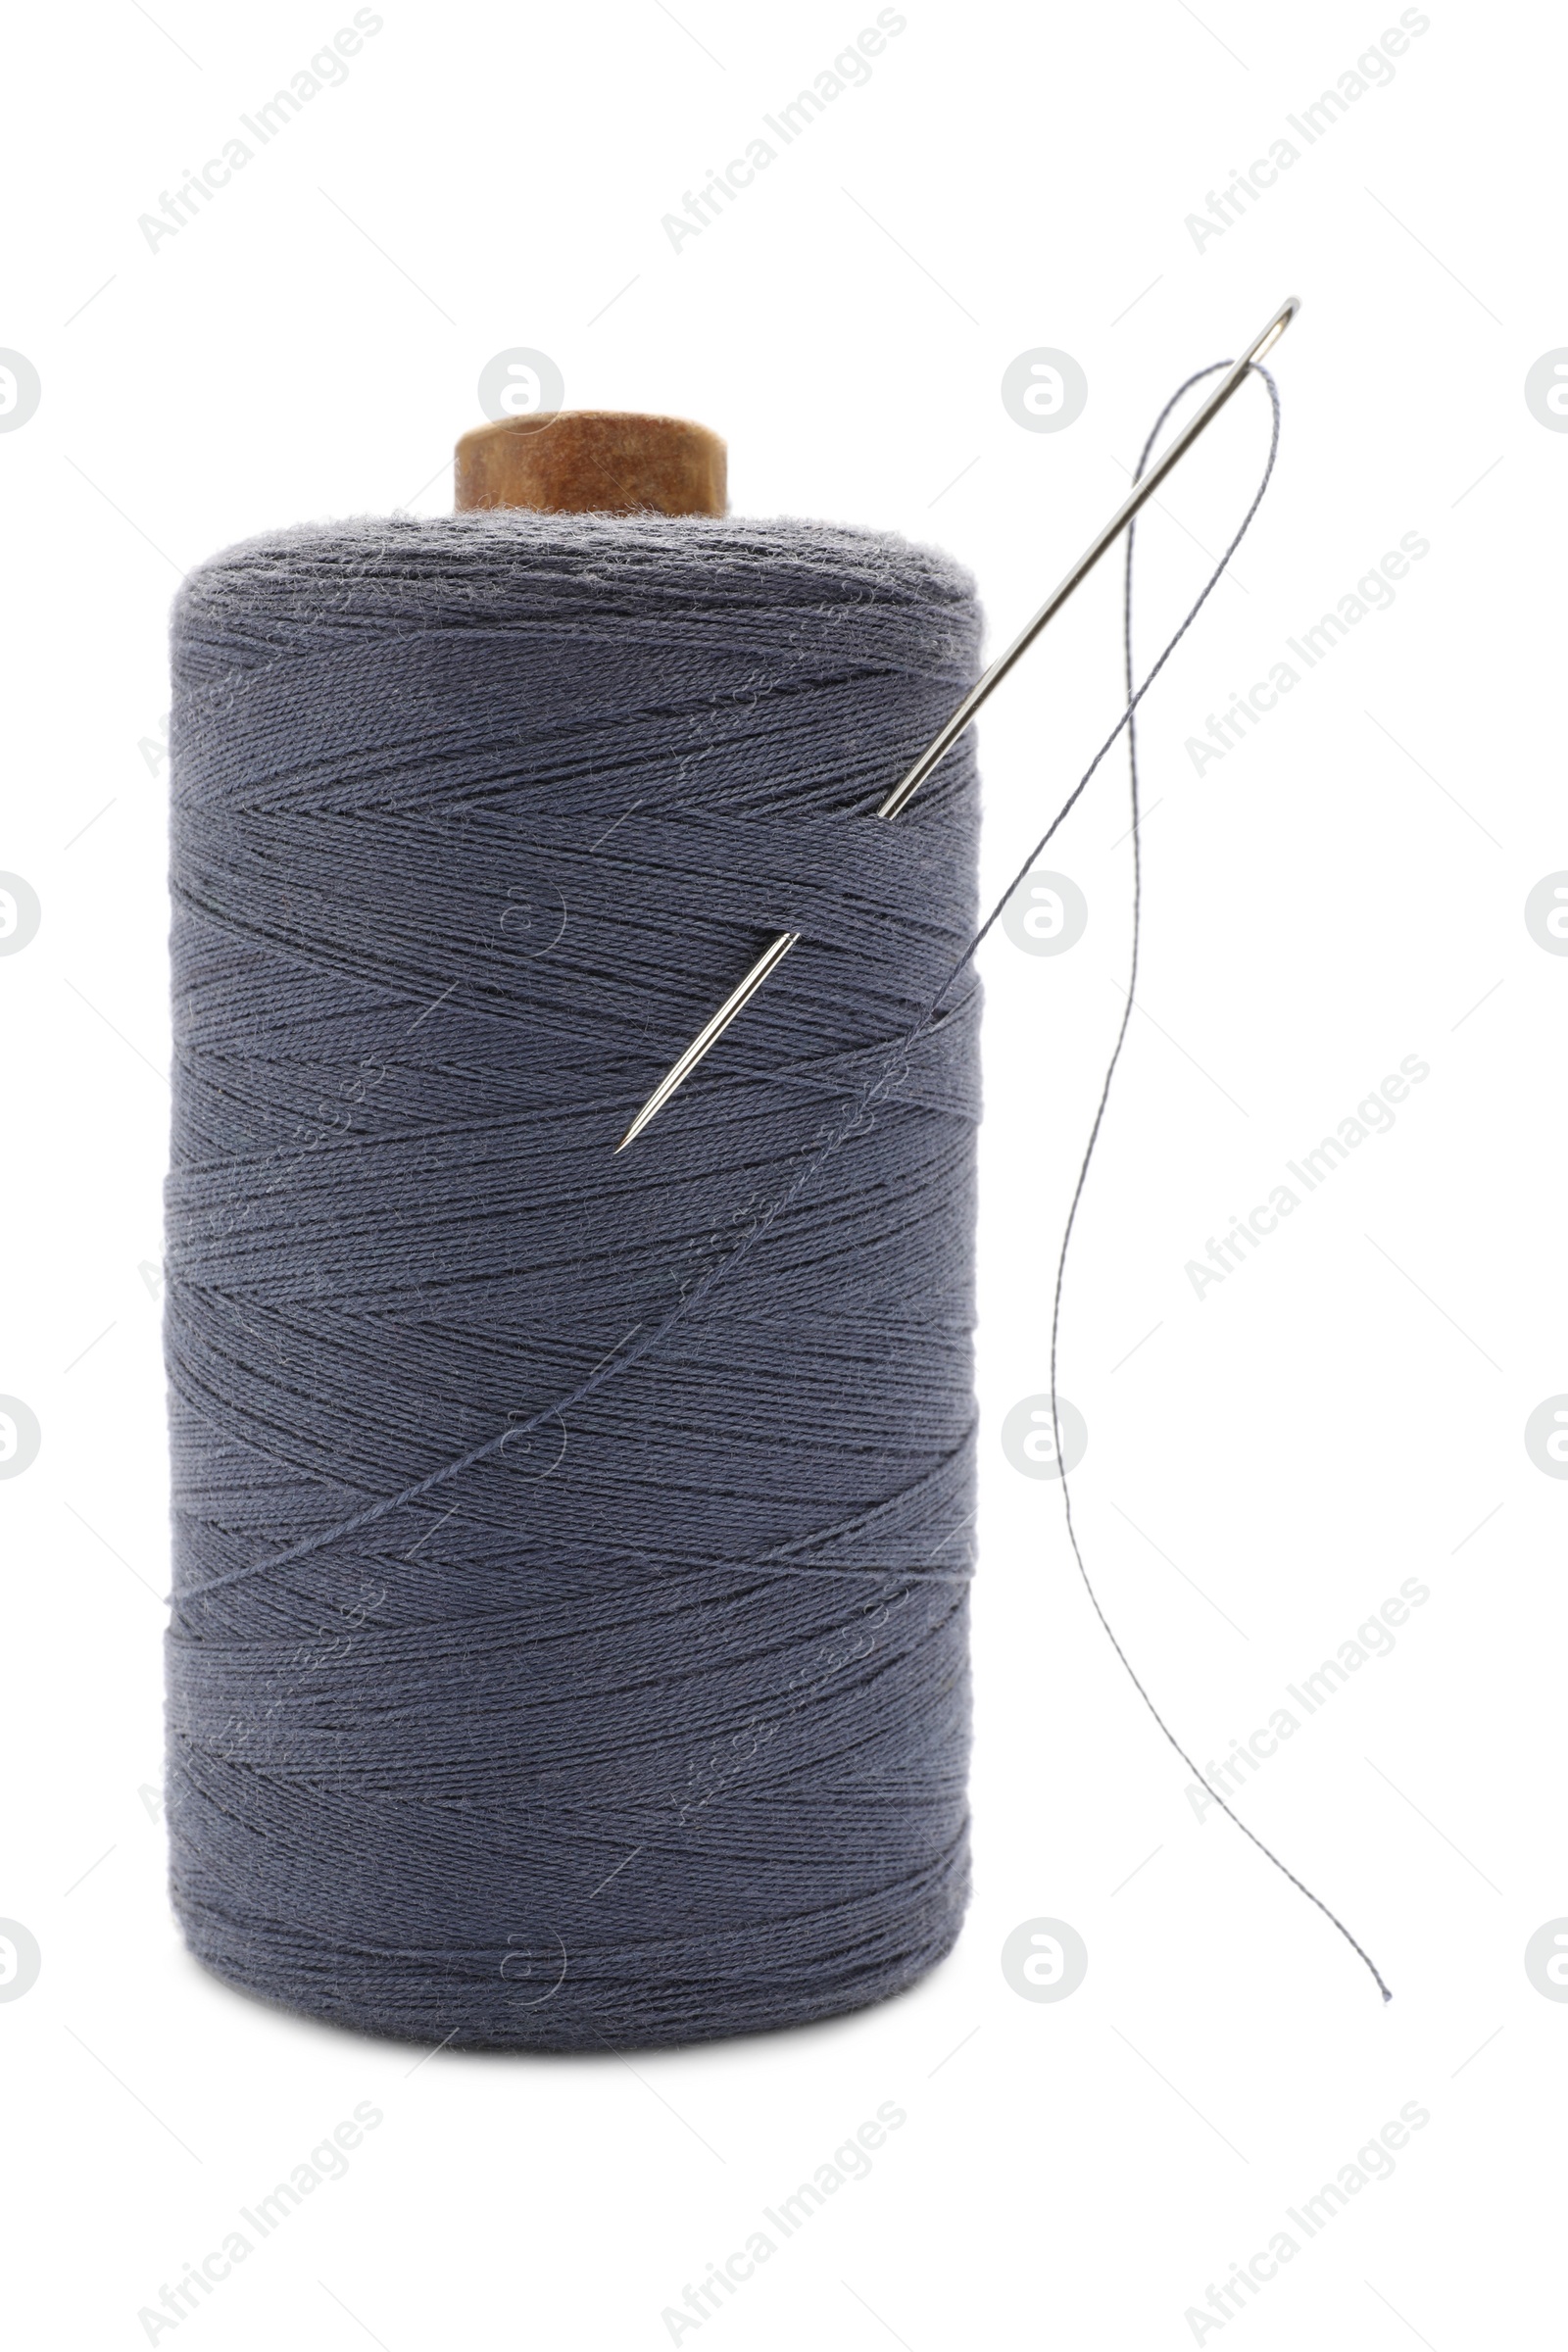 Photo of Grey sewing thread with needle on white background